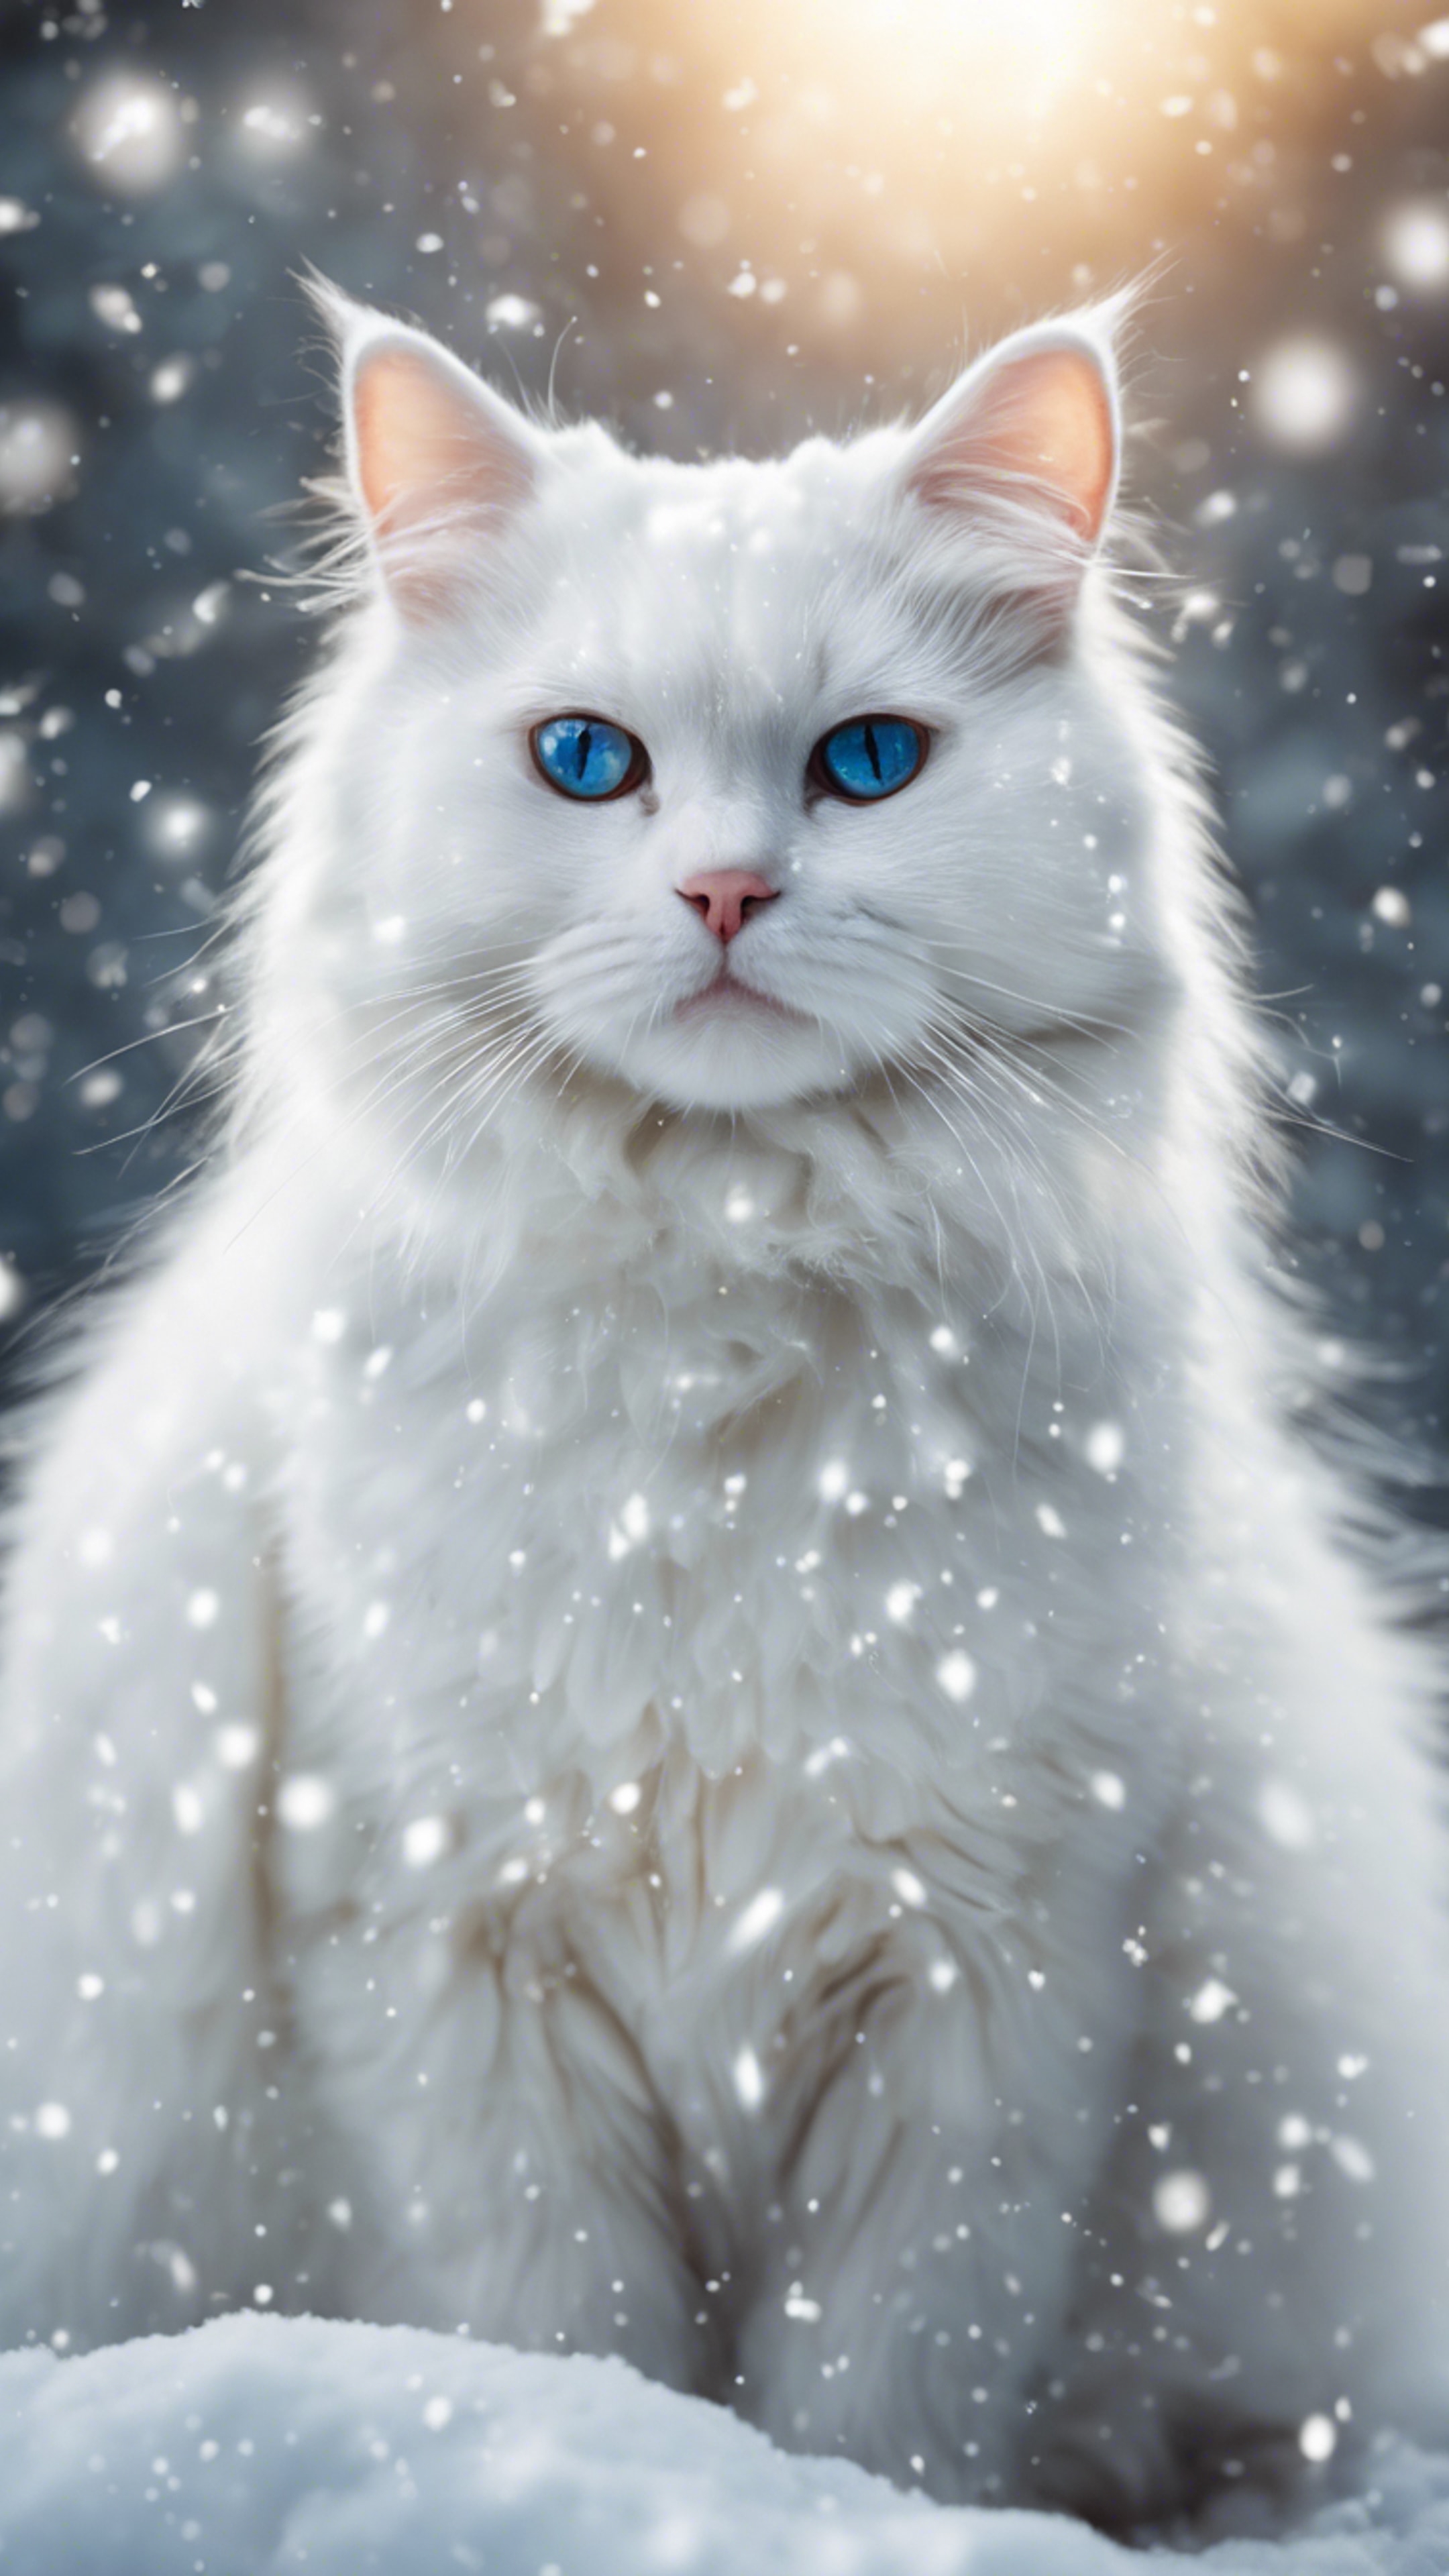 A fluffy white cat in the winter, amidst falling snowflakes. Tapet[a246cb8c0cd2485b96c3]